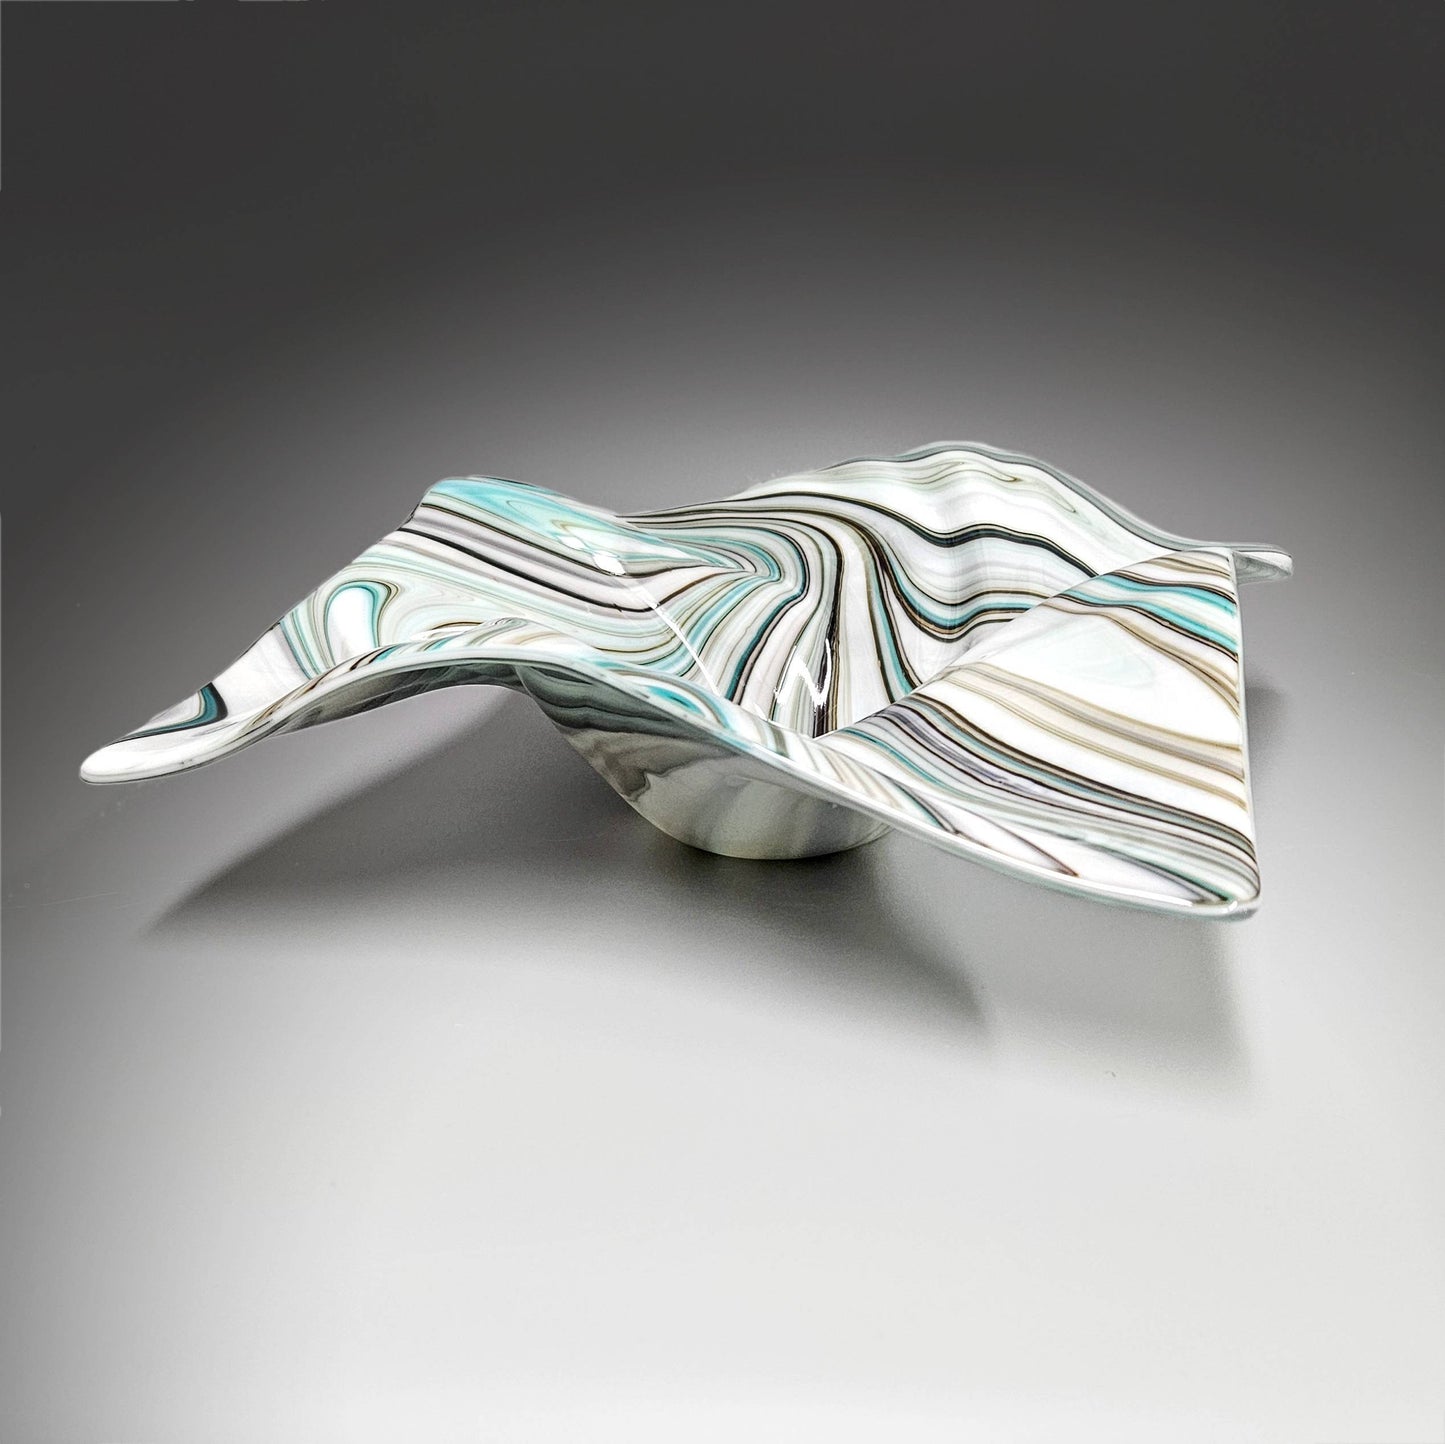 Glass Art Wave Bowl in Aqua Gray and White